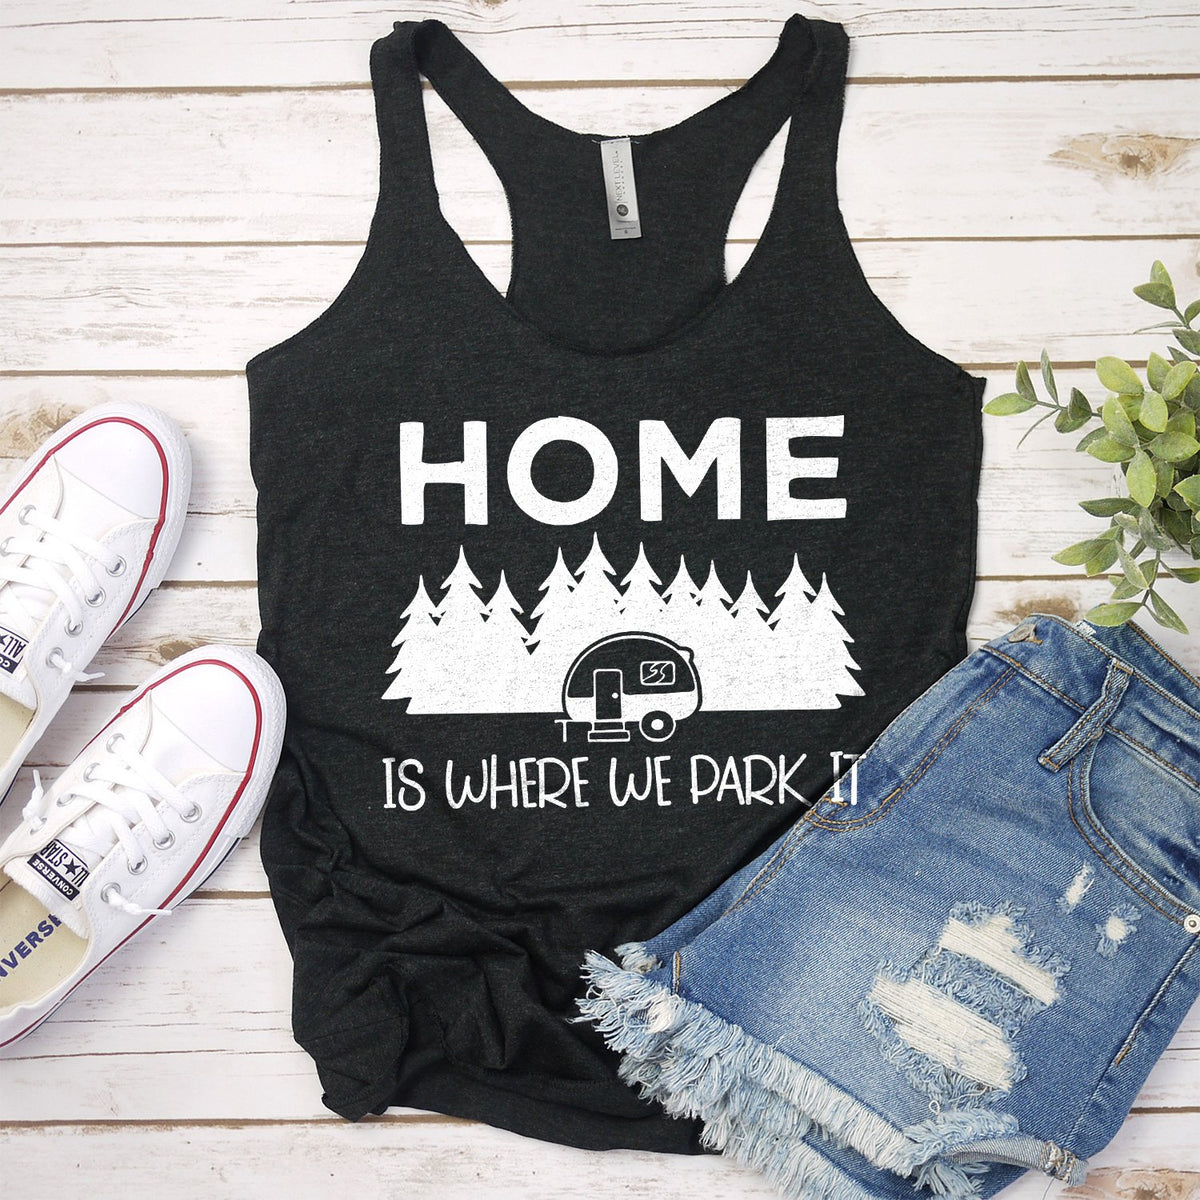 Home Is Where We Park It - Tank Top Racerback